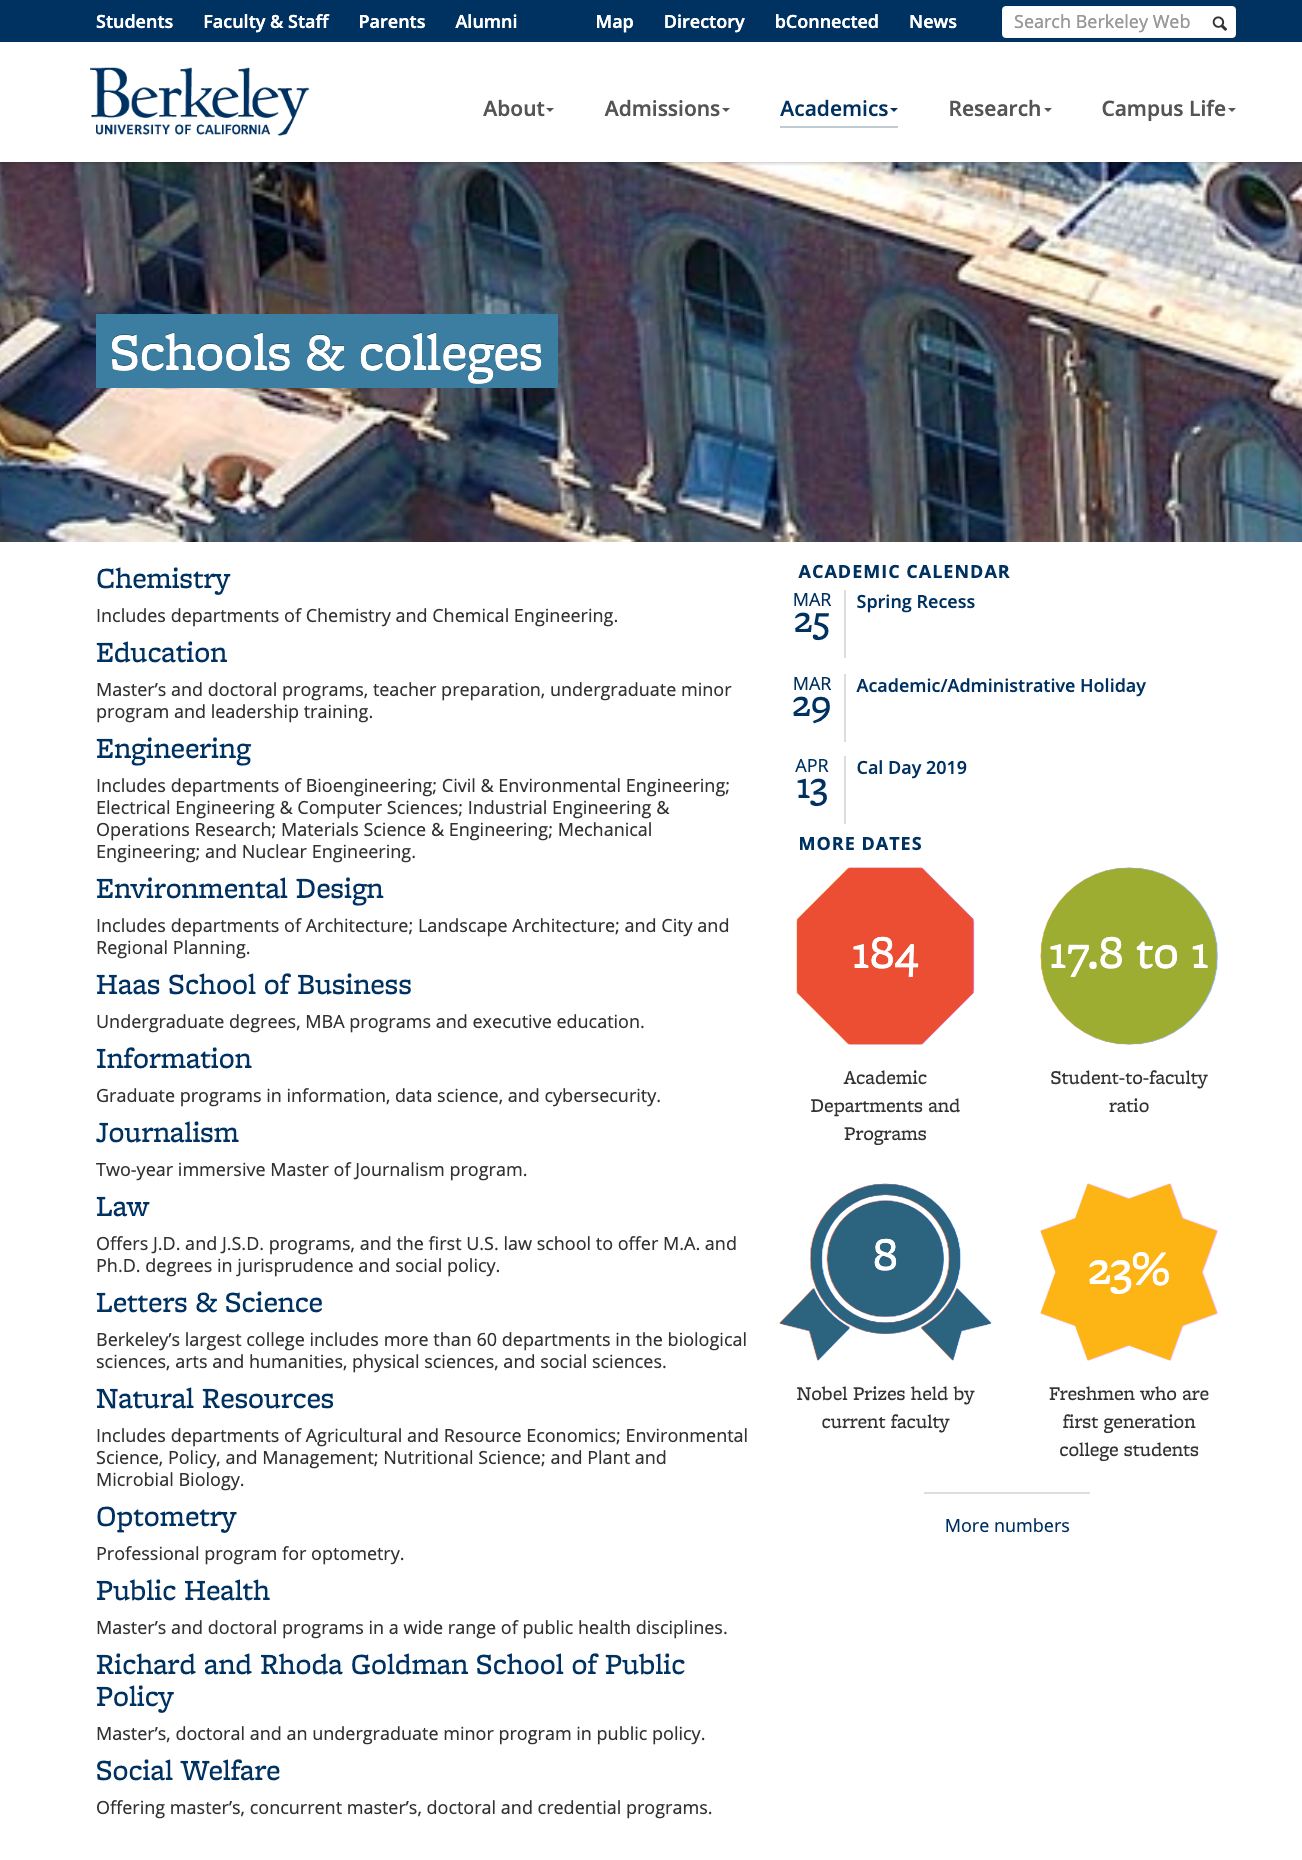 The University of California, Berkeley schools and colleges menu page